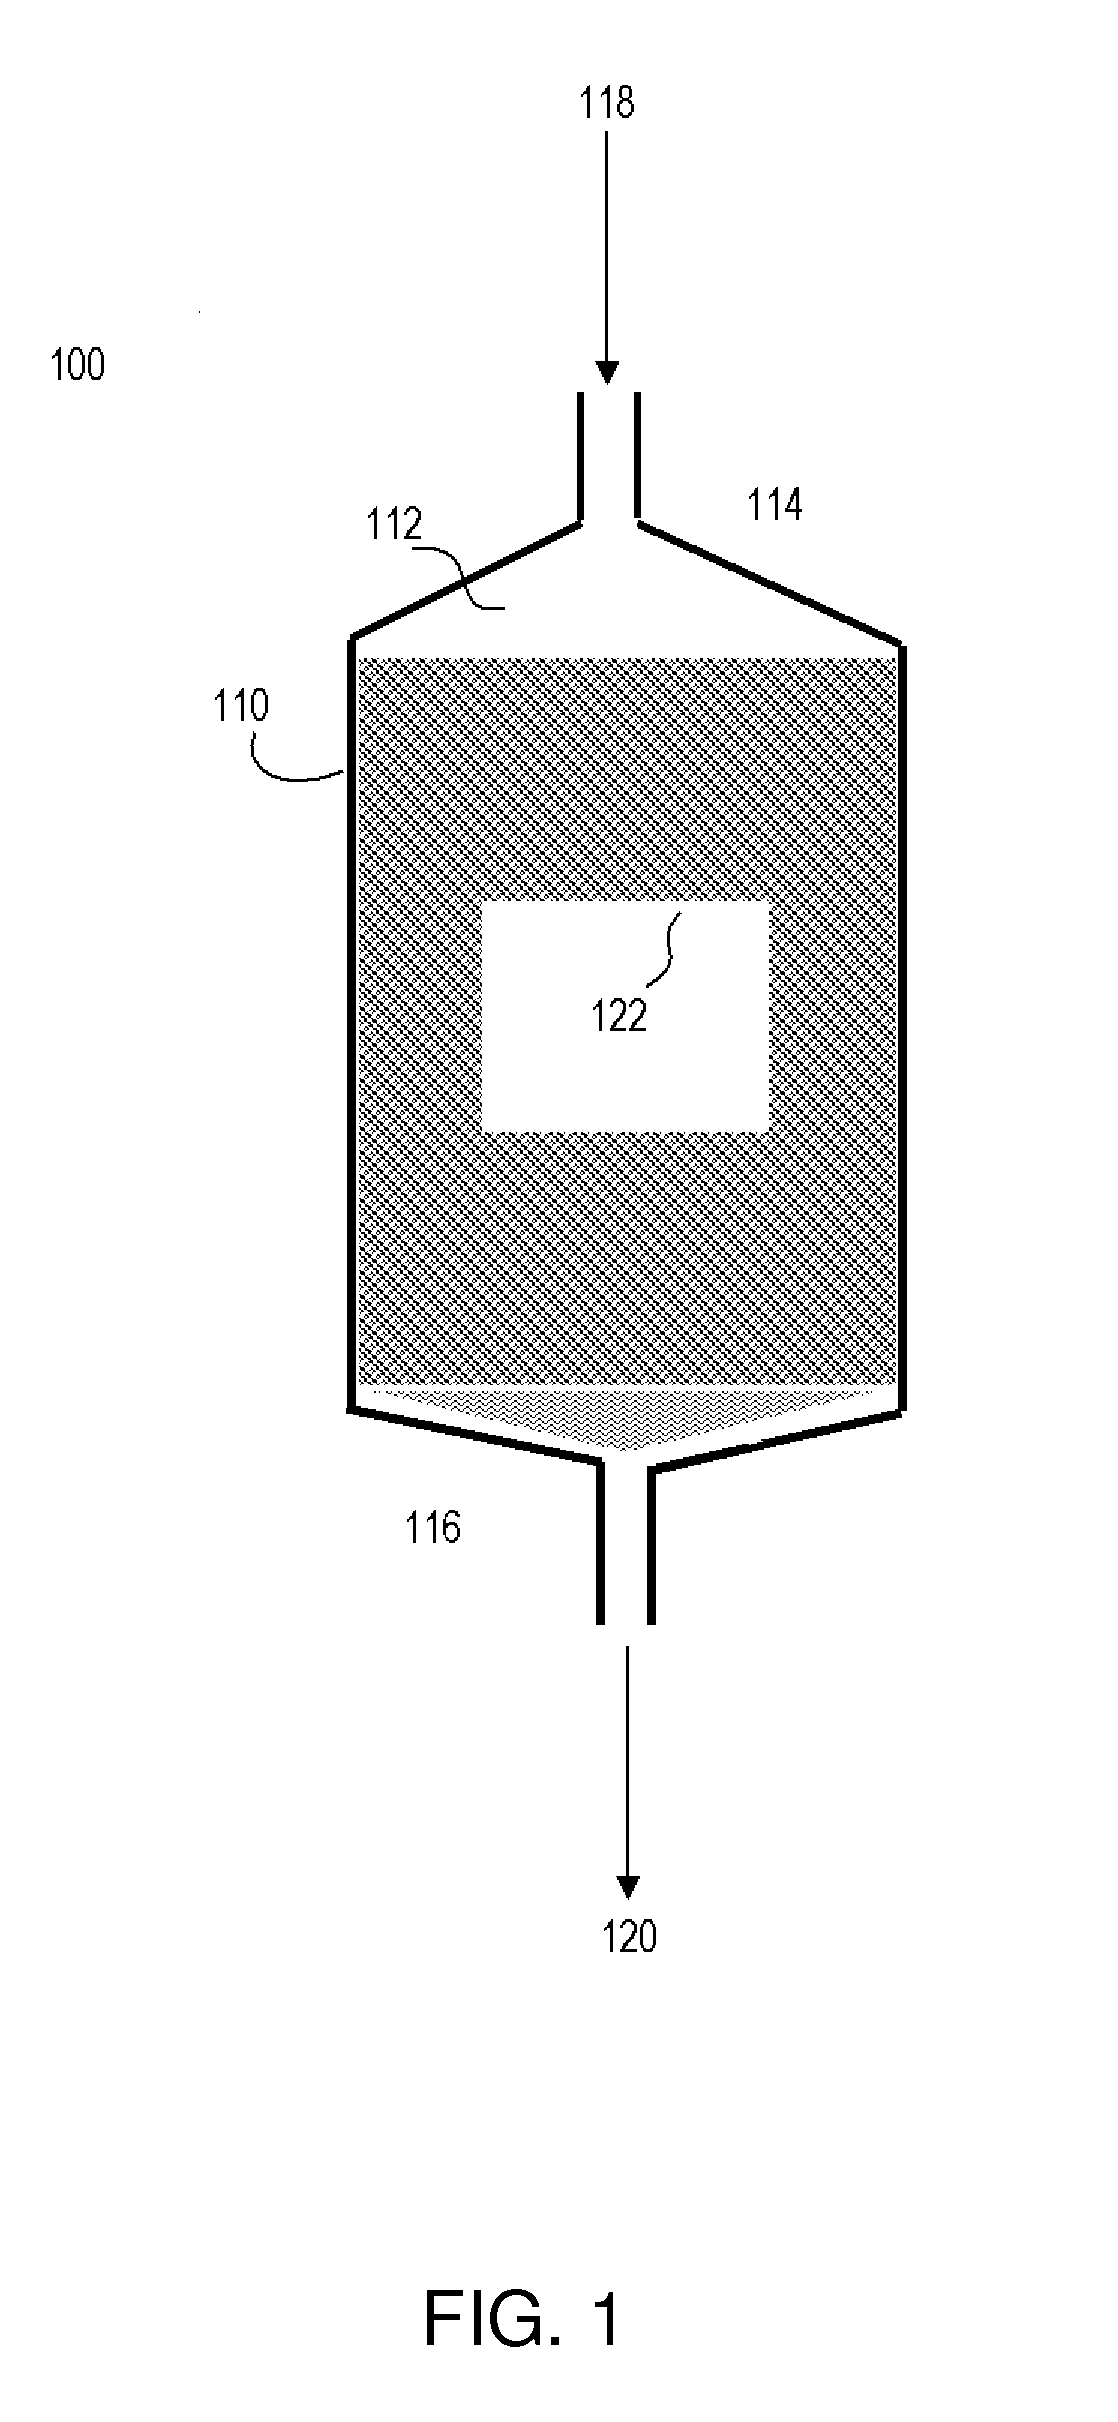 Methods, devices, and systems for the separation and concentration of isotopologues